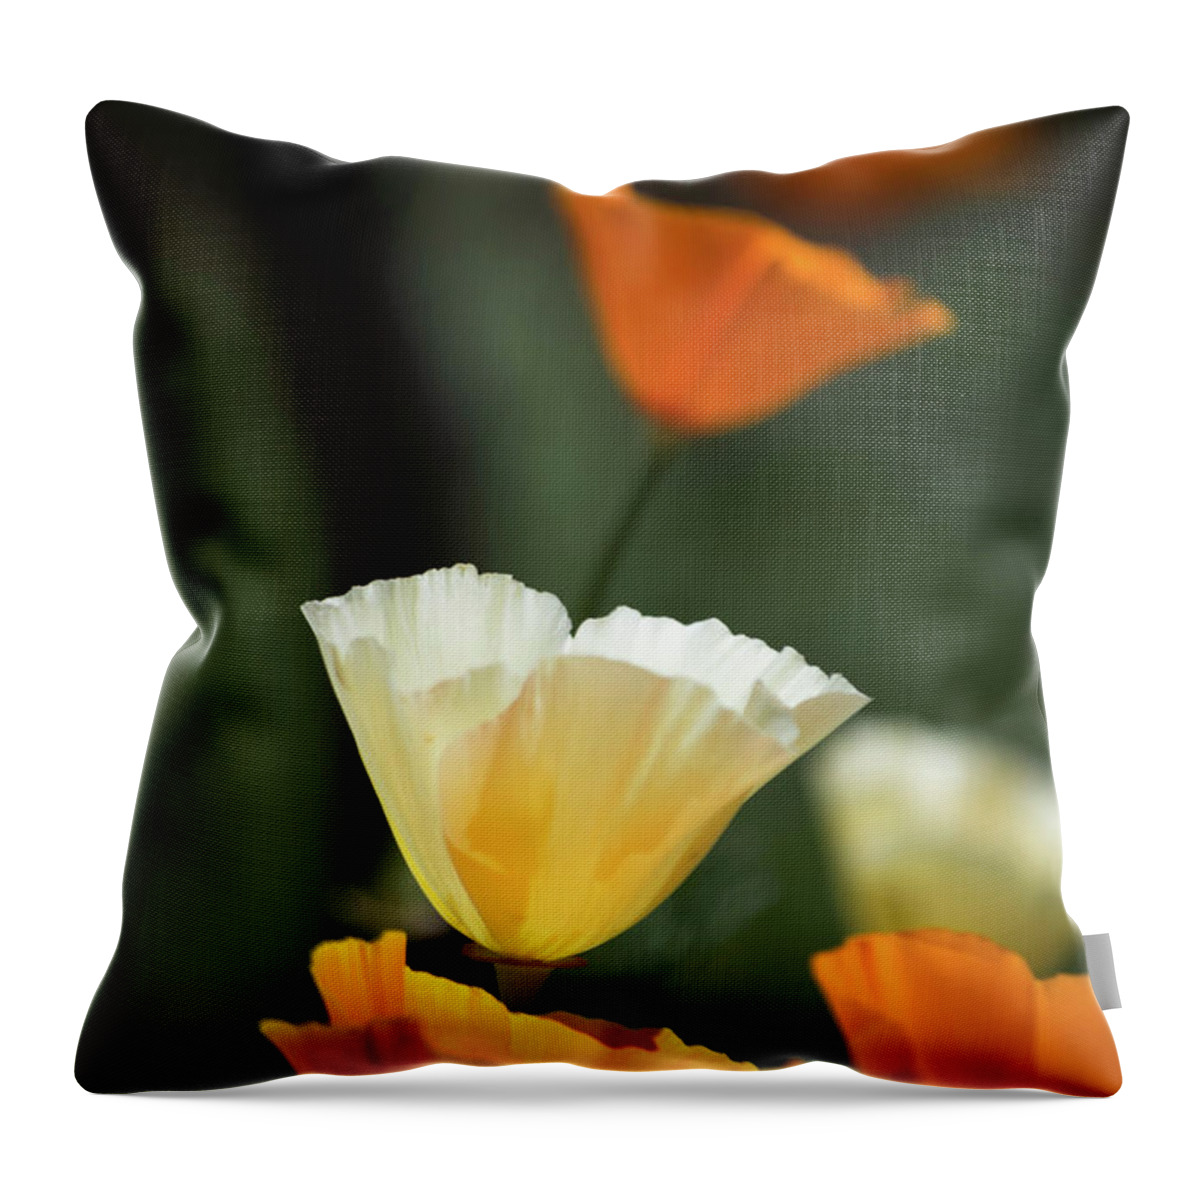 Orange Throw Pillow featuring the photograph Poppy Glow by Steph Gabler